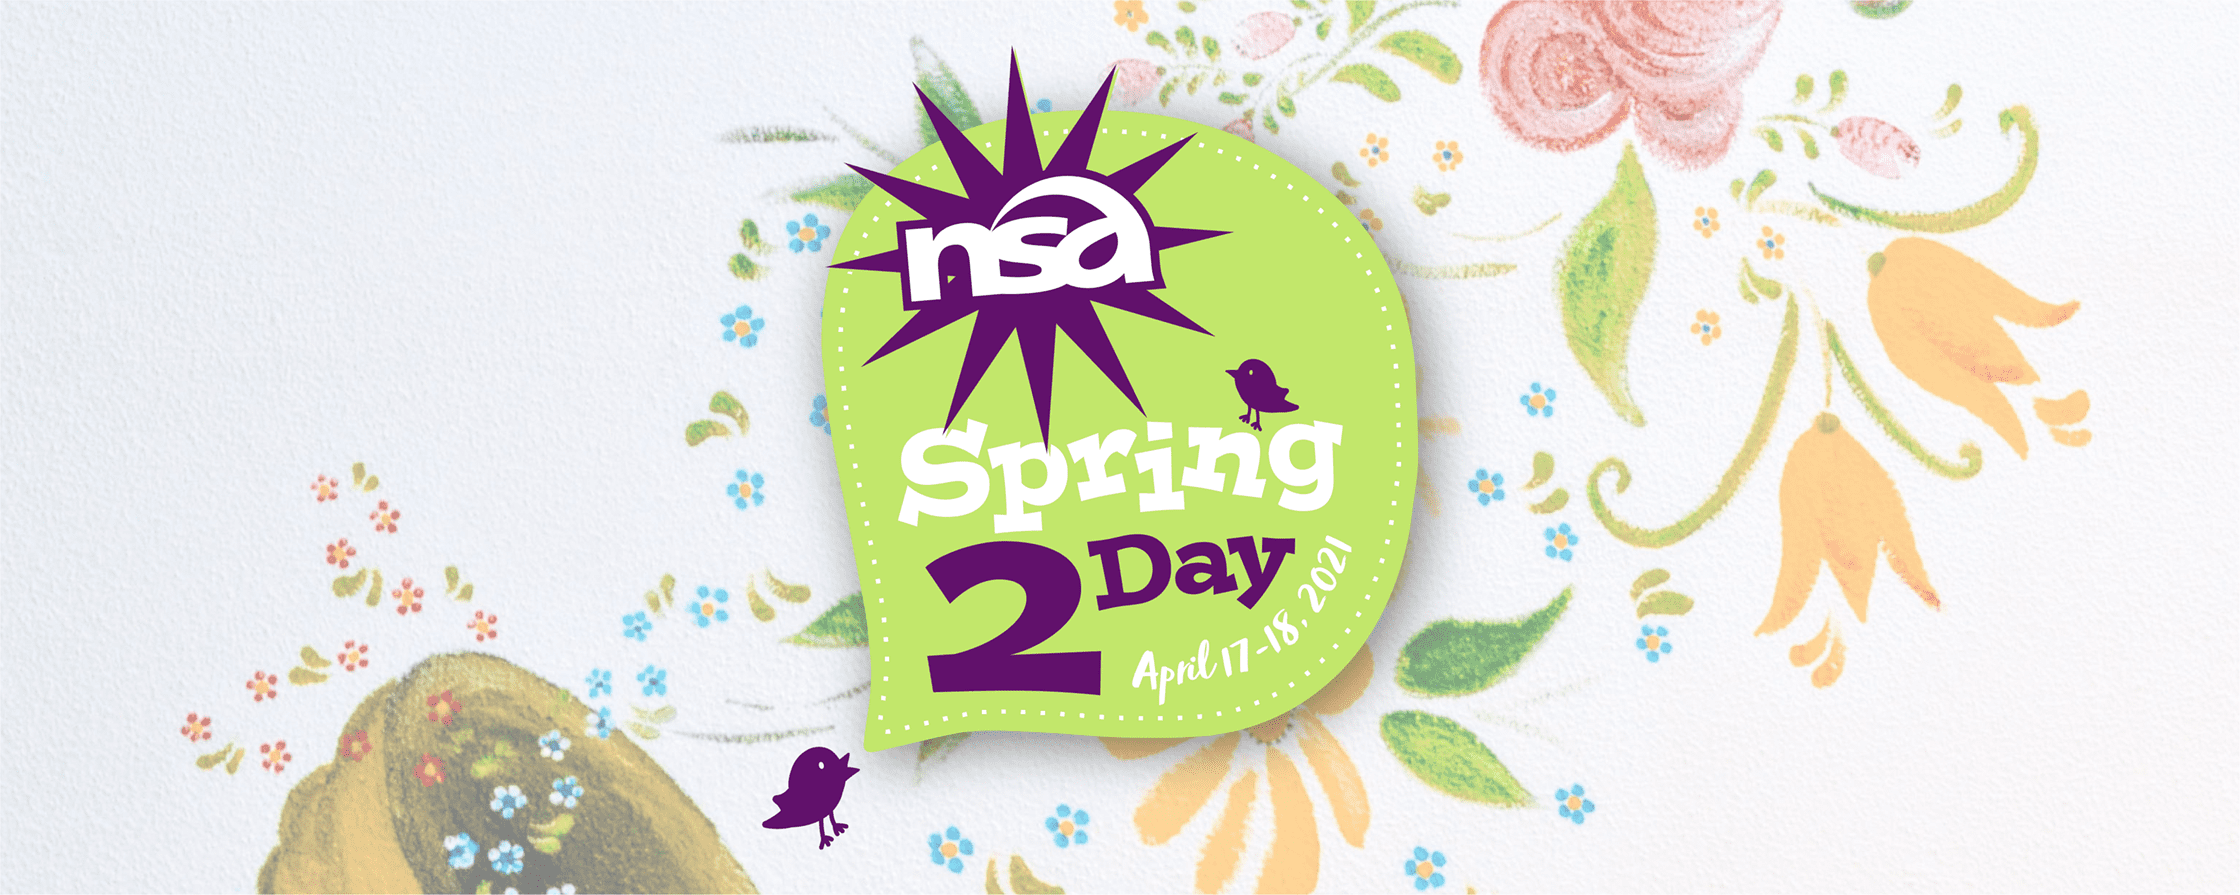 A promotional graphic for the rca spring 2 day event on april 17-18, featuring a vibrant green logo with purple details on a floral background with birds and flowers.